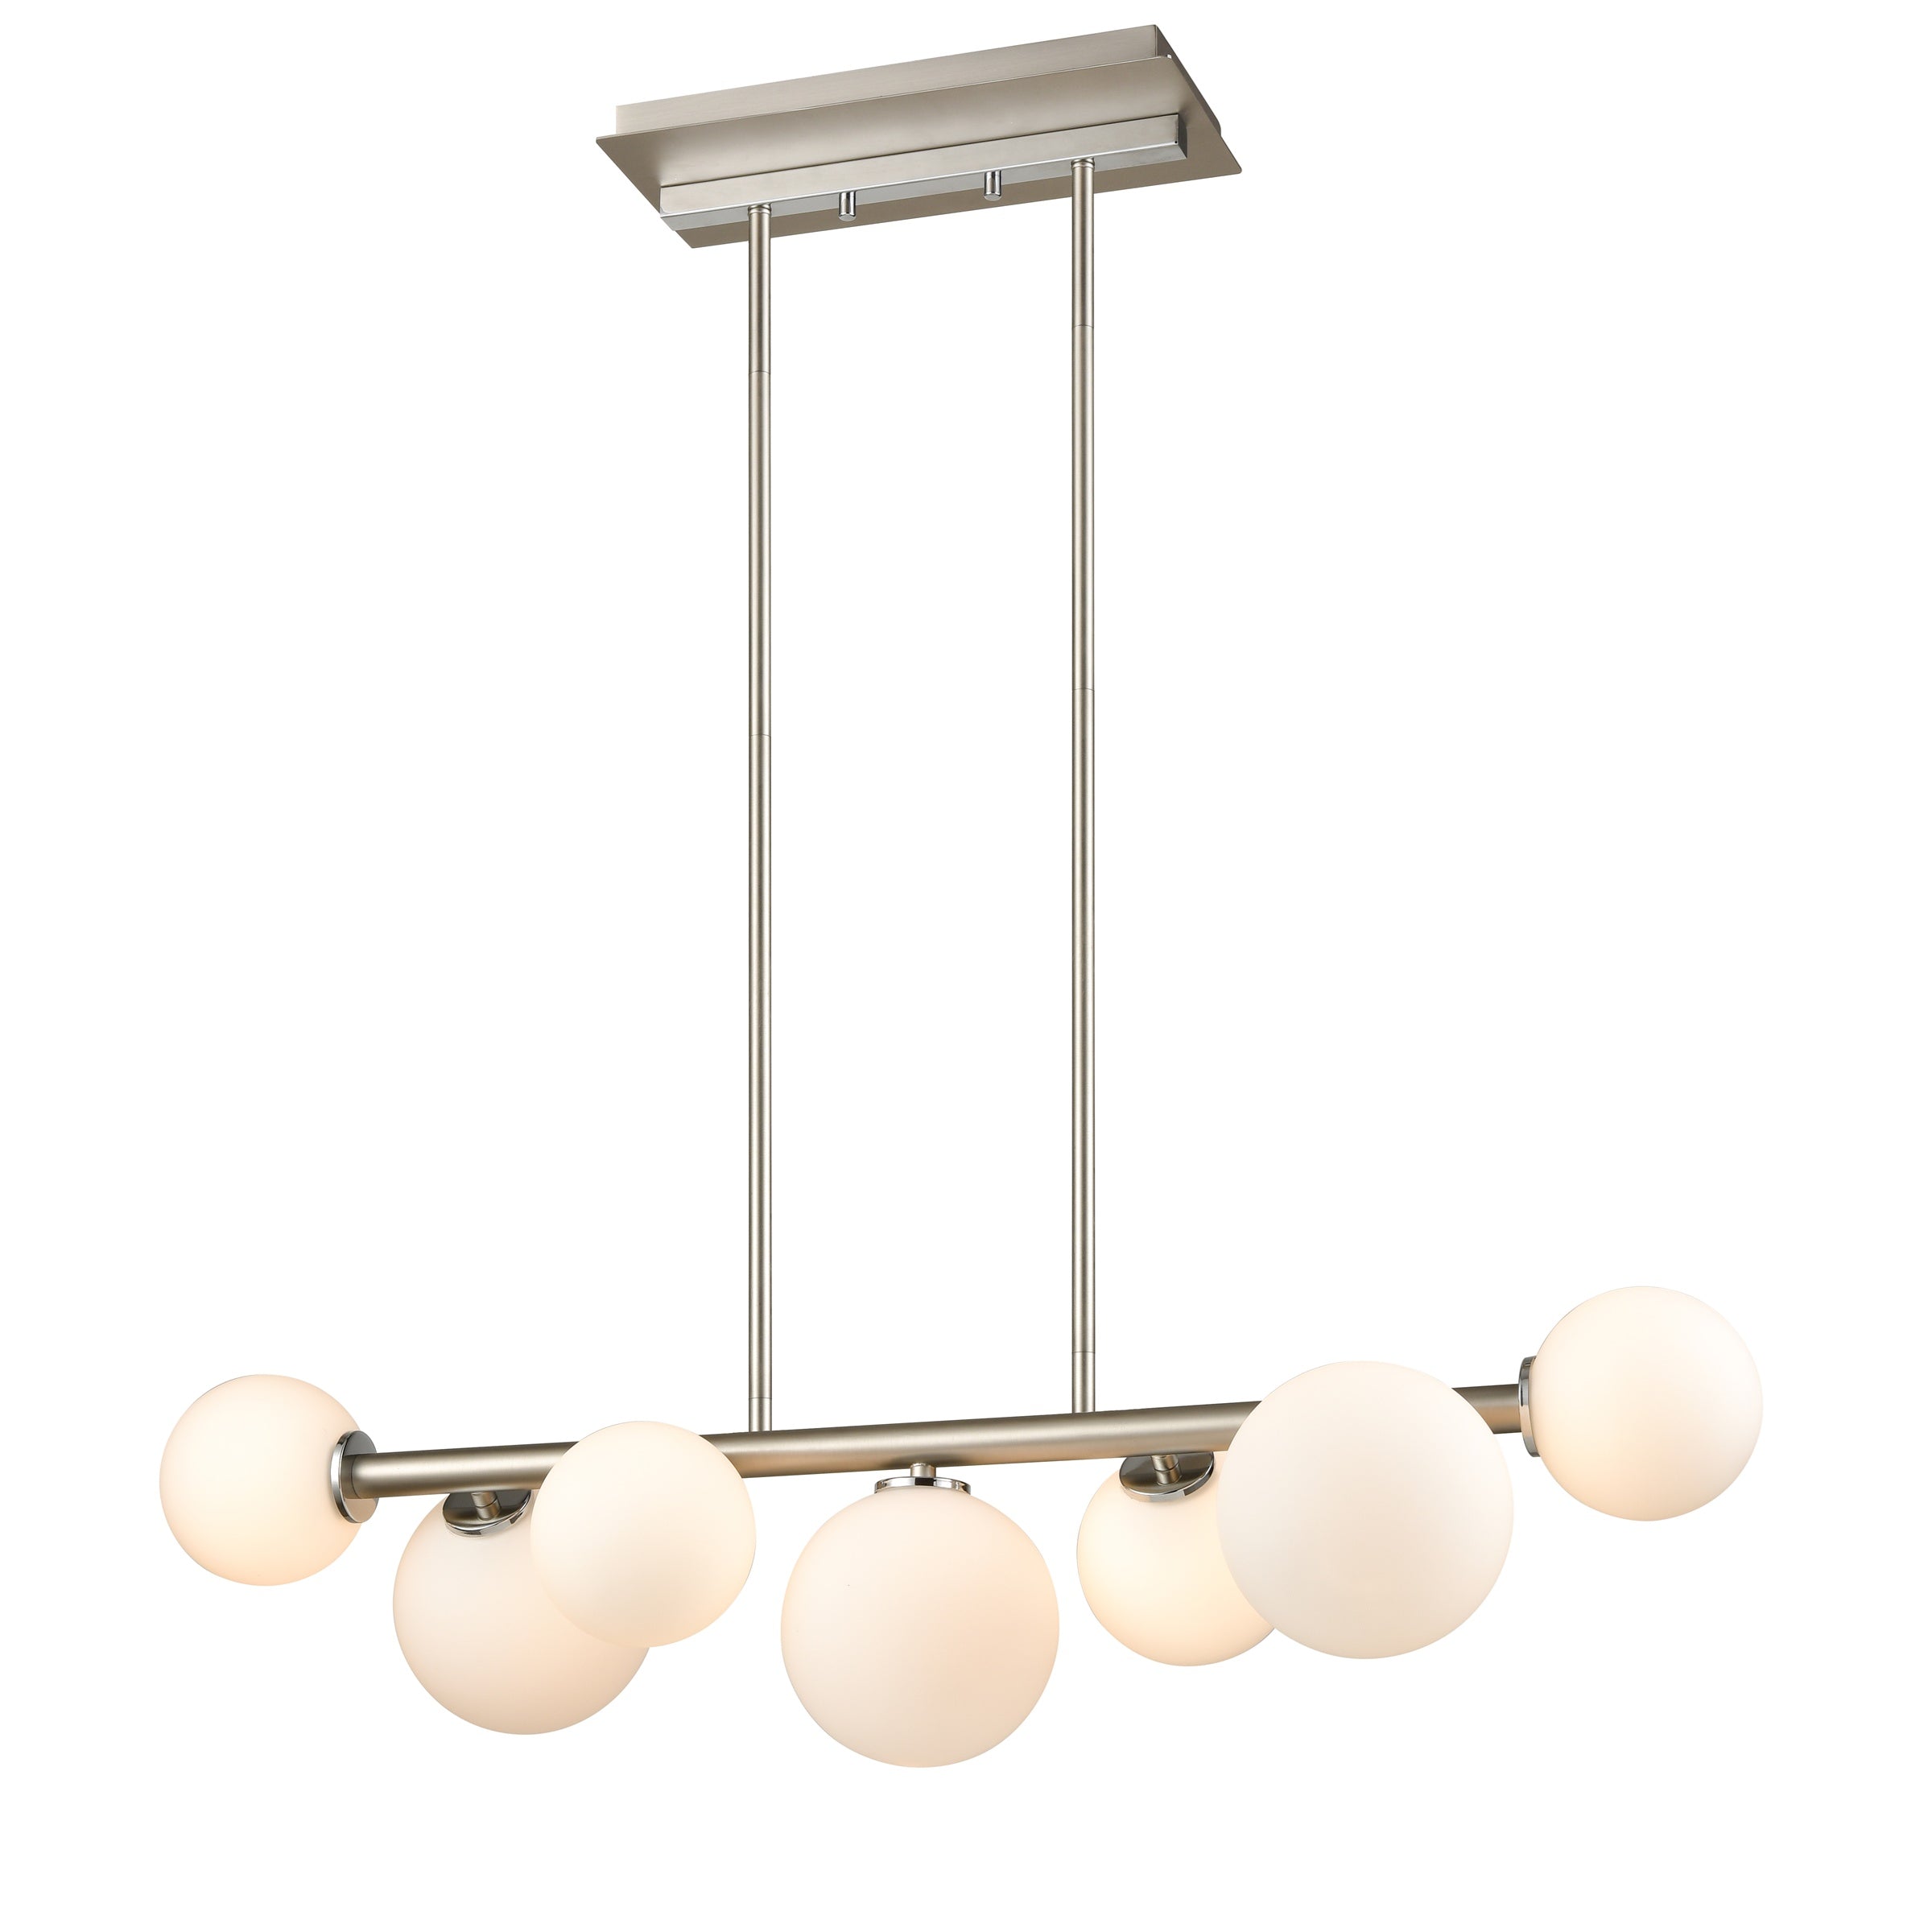 Alouette Linear Suspension Chrome and Buffed Nickel with Half Opal Glass